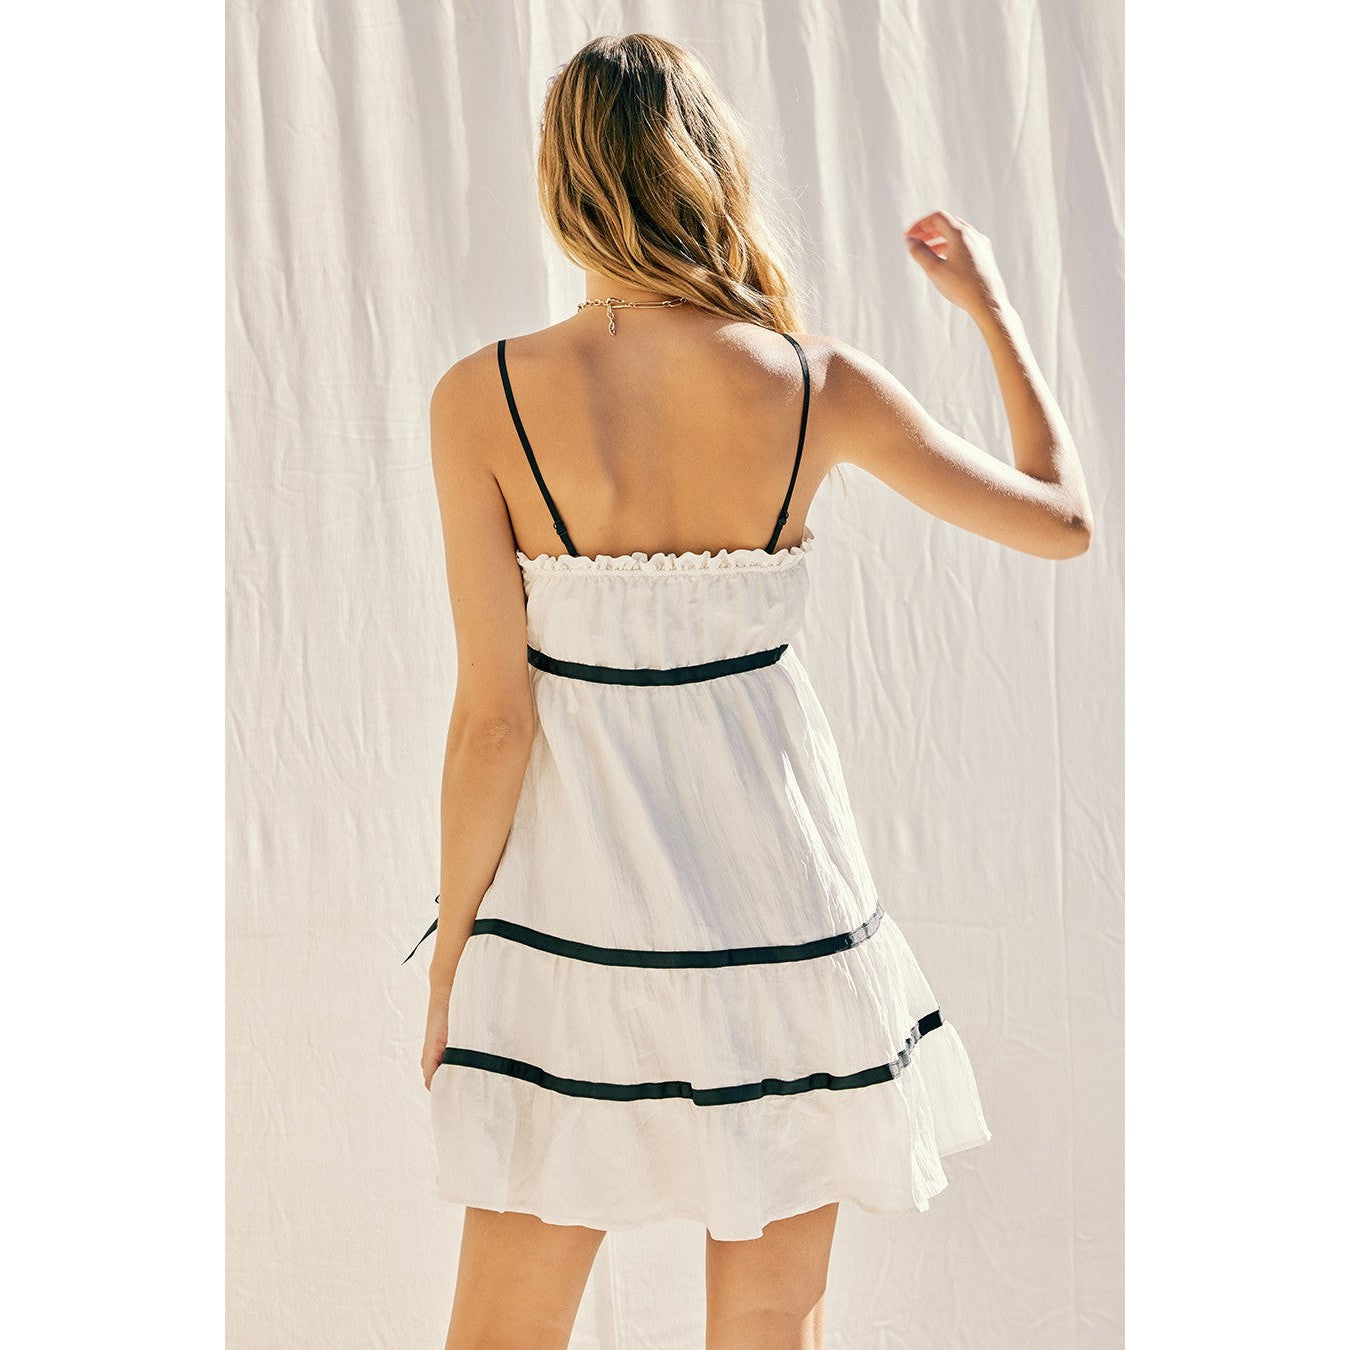 Textured Dress with Bows || Ivory